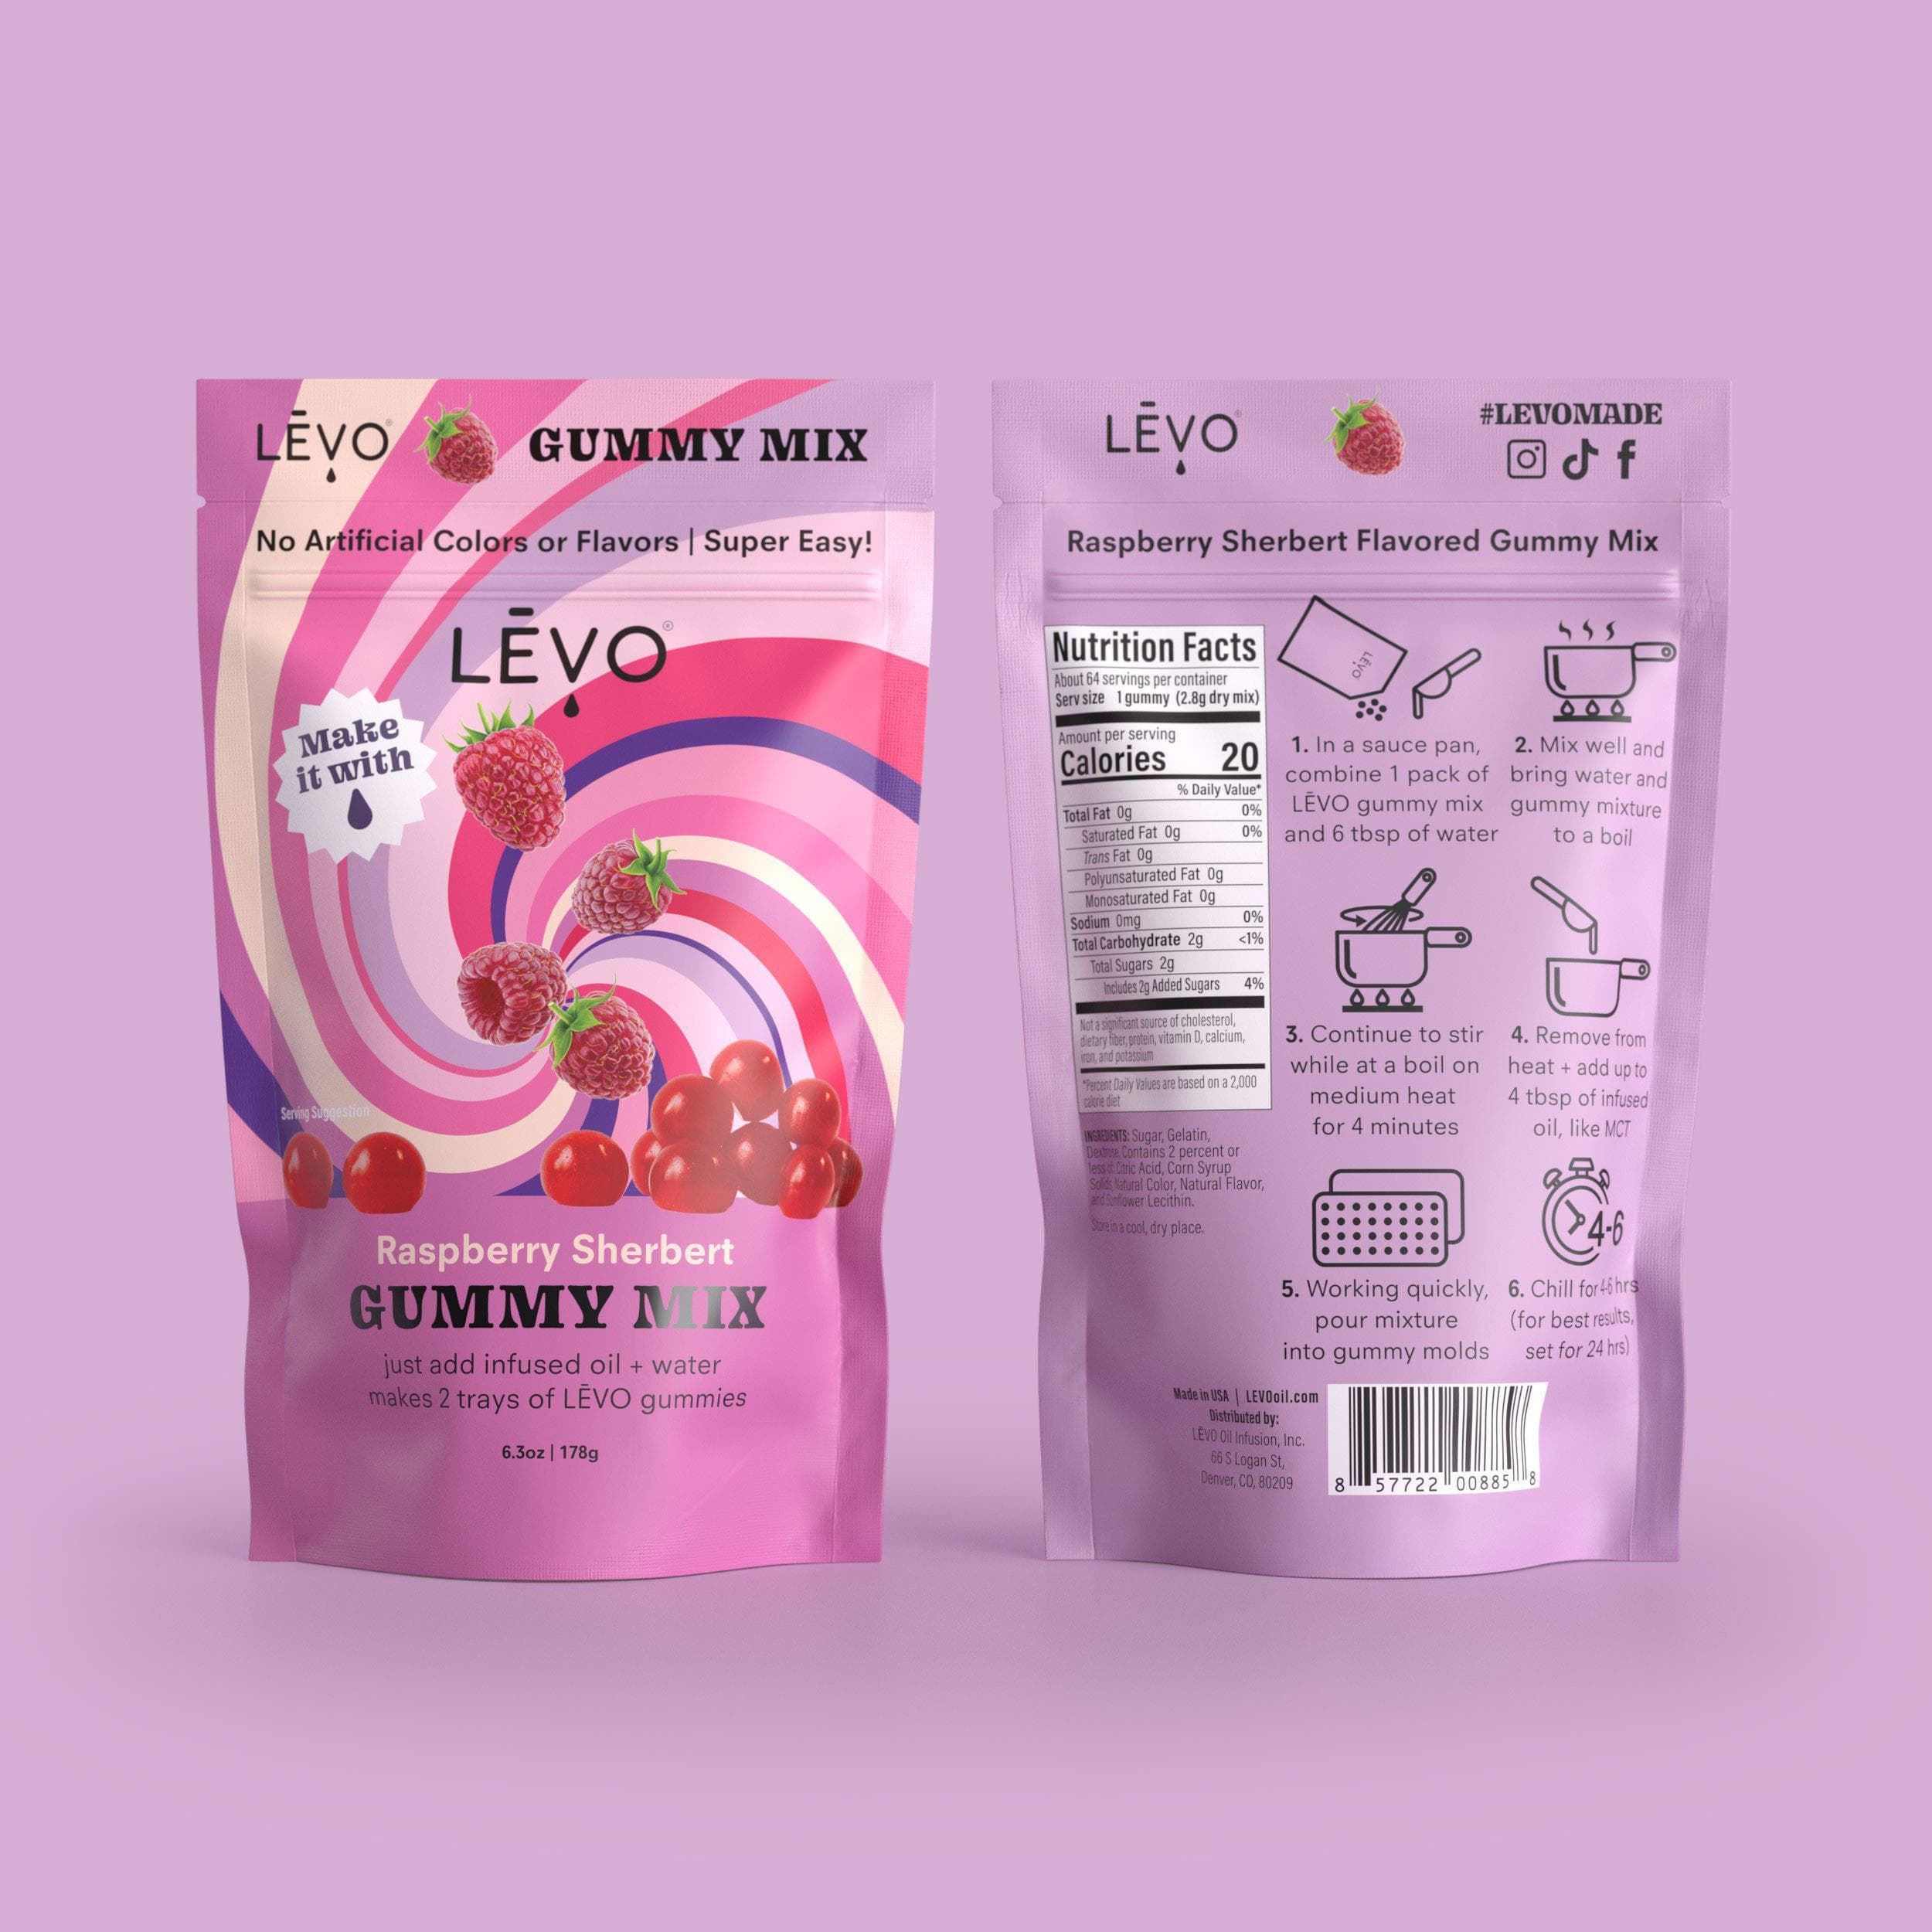 LEVO Raspberry Gummy Mix in our Gummy Mix Two Pack. Elevate your edibles.